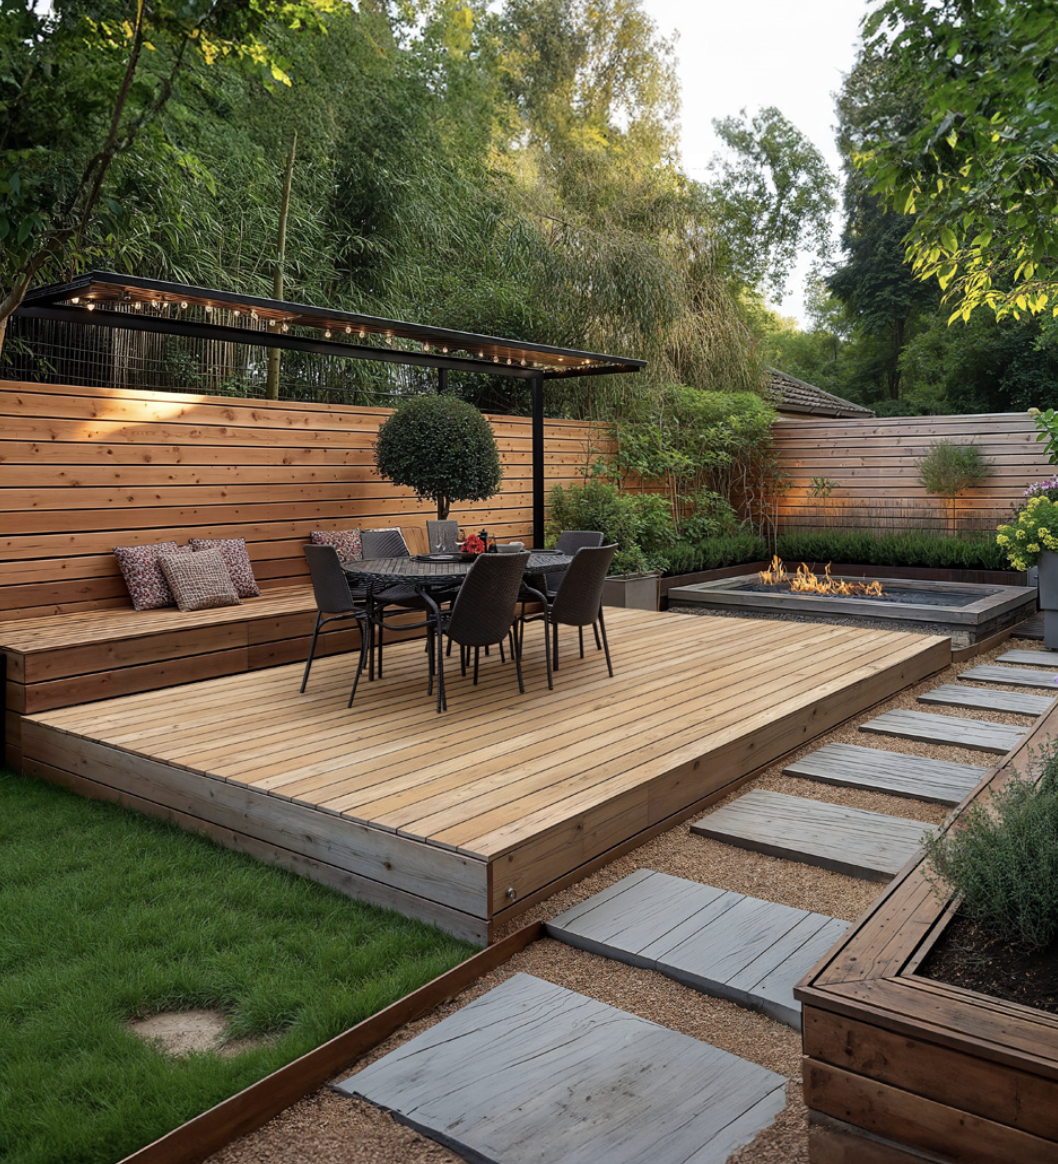 Discover 15 creative ways to transform your back deck into the ultimate outdoor oasis. From cozy furniture to twinkling lights, get ready to turn your deck into a space you'll never want to leave.